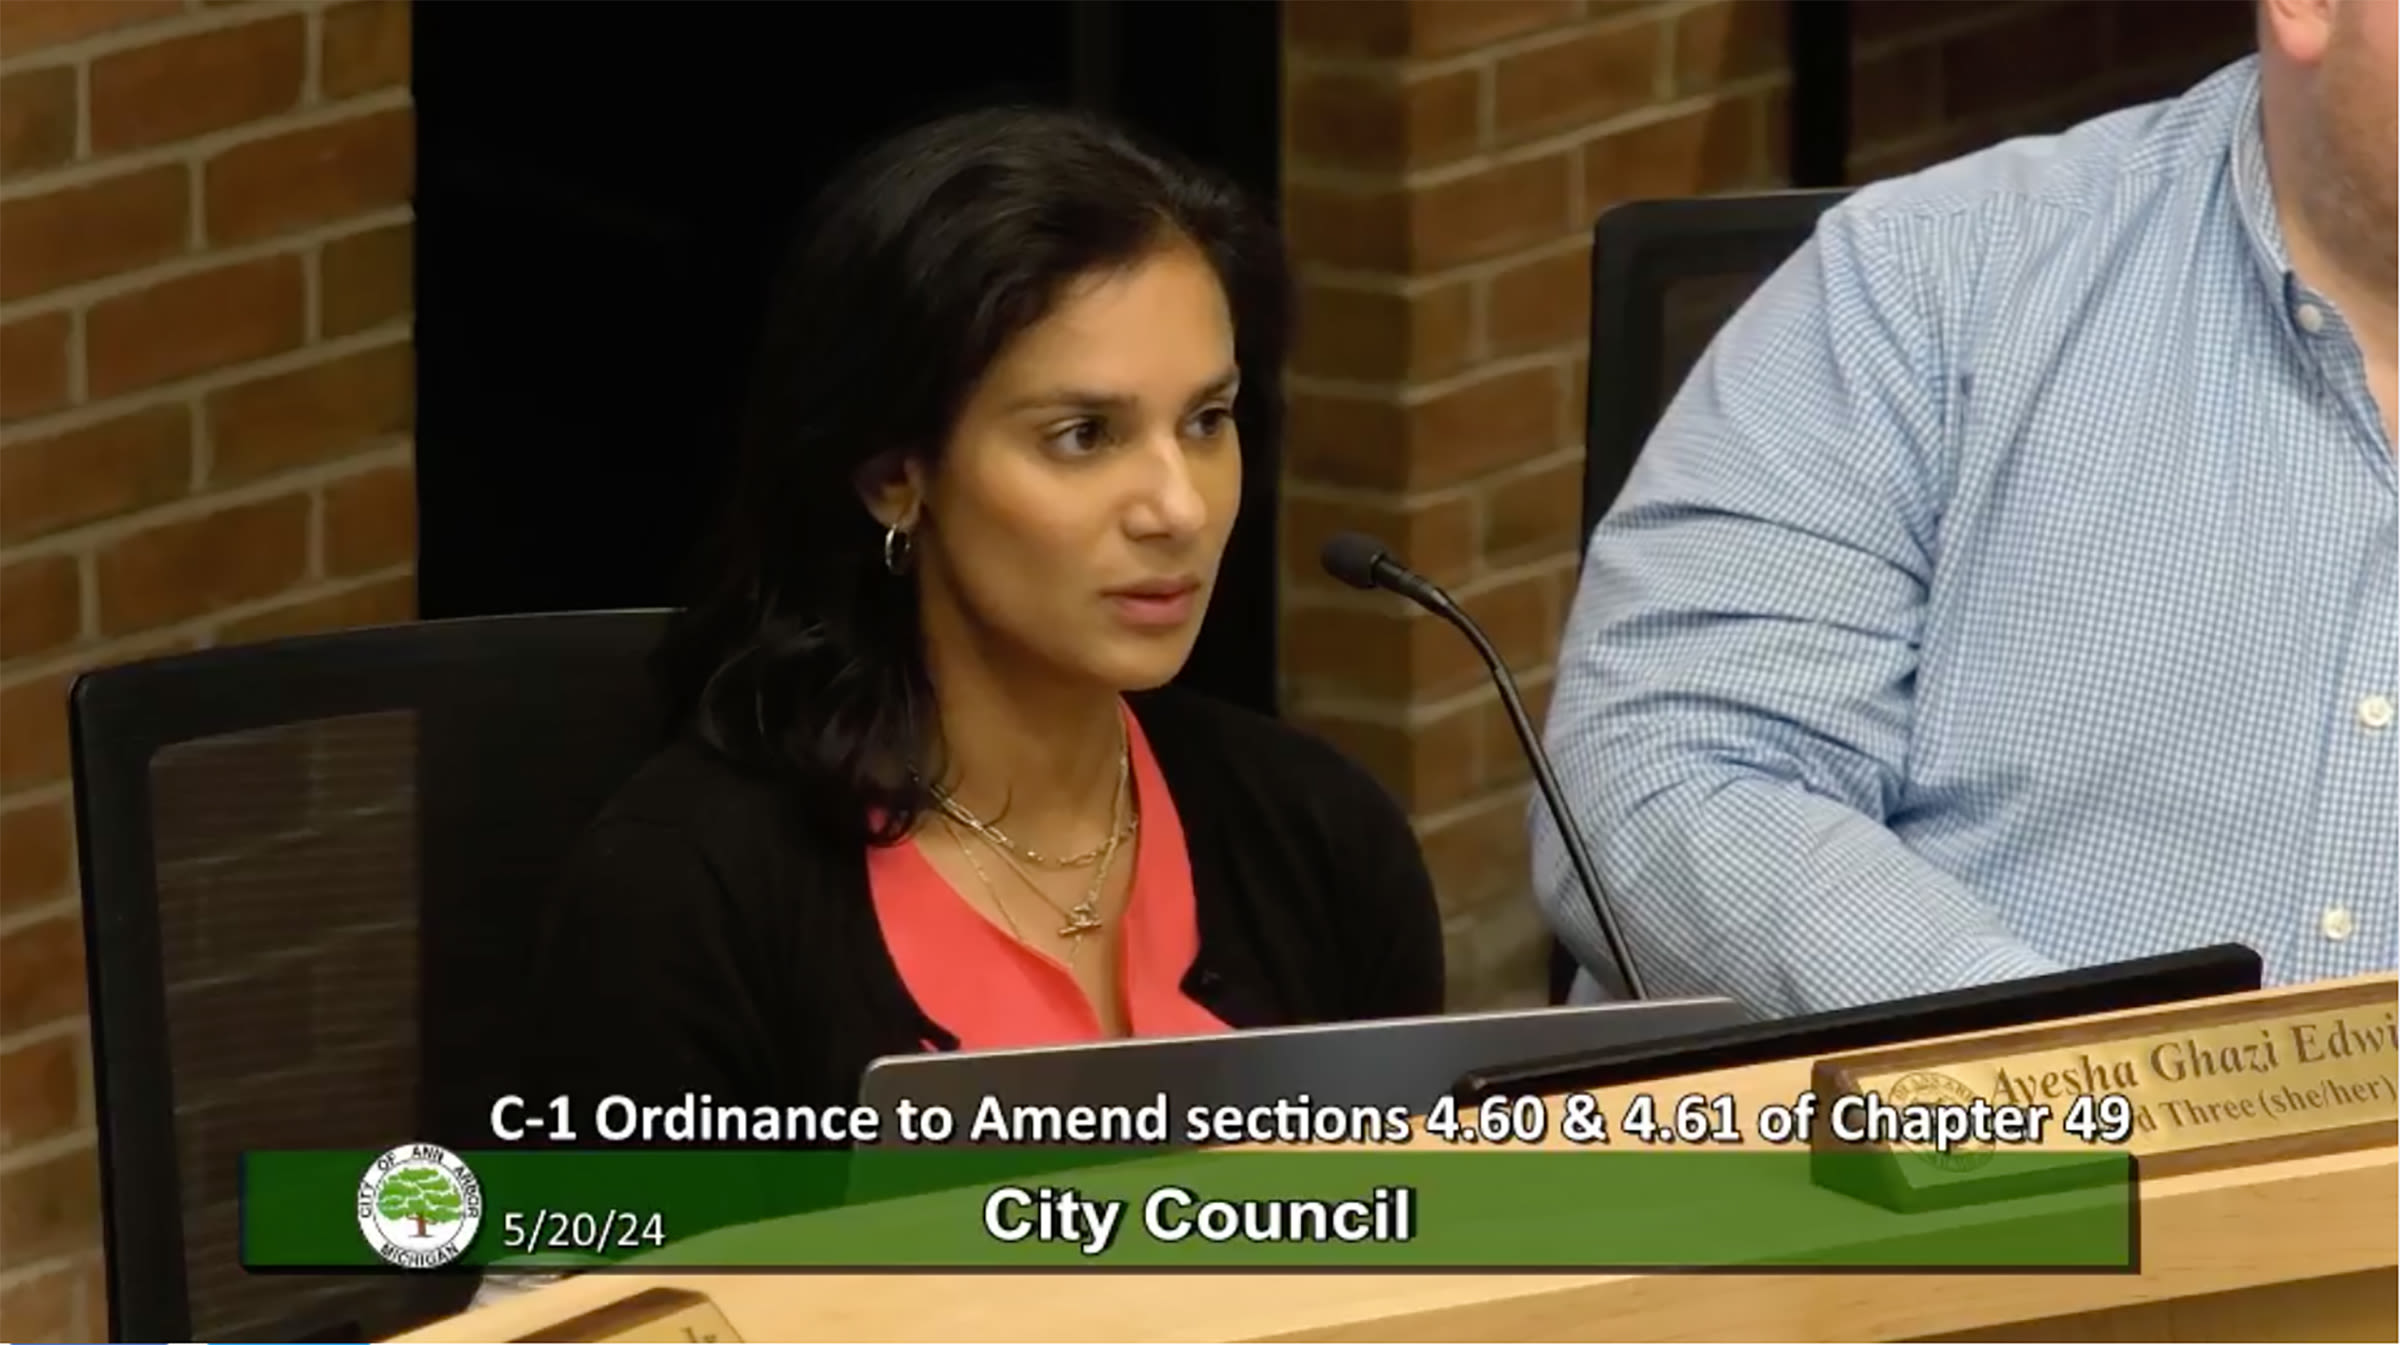 Ann Arbor City Council approves fiscal budget, increasing funding to housing and eviction prevention programs